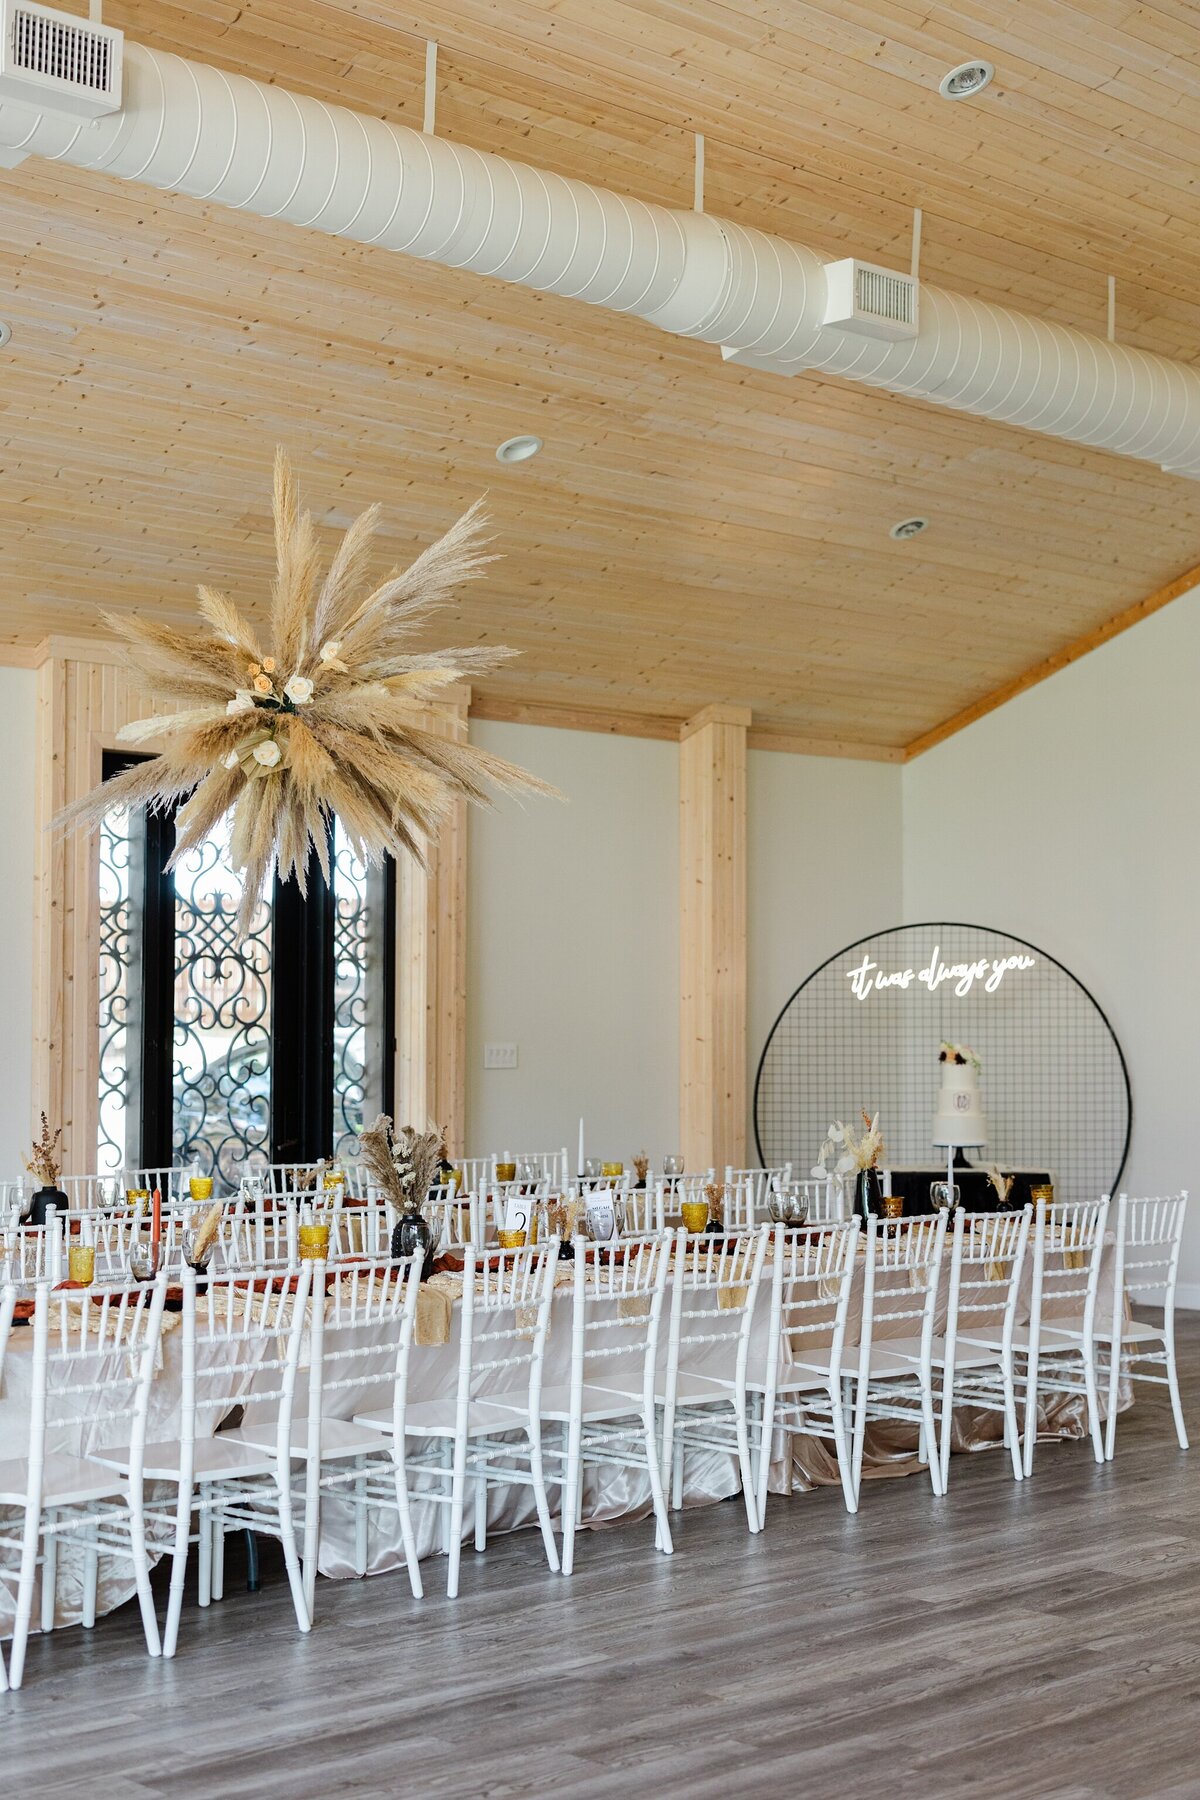 A detail shot of a reception room at a wedding reception in Dallas, Texas. A long, rectangular table can be see in the foreground. It's covered by a long, white tablecloth and is covered with place settings, napkins, cutlery, glasses, floral centerpieces and surrounded by white chairs. A similar table can be seen behind it. Above the tables is a large hanging floral decoration. Behind the table is the cake table with a three tiered wedding cake resting on it. Behind the cake hangs a neon sign reading "it was always you."